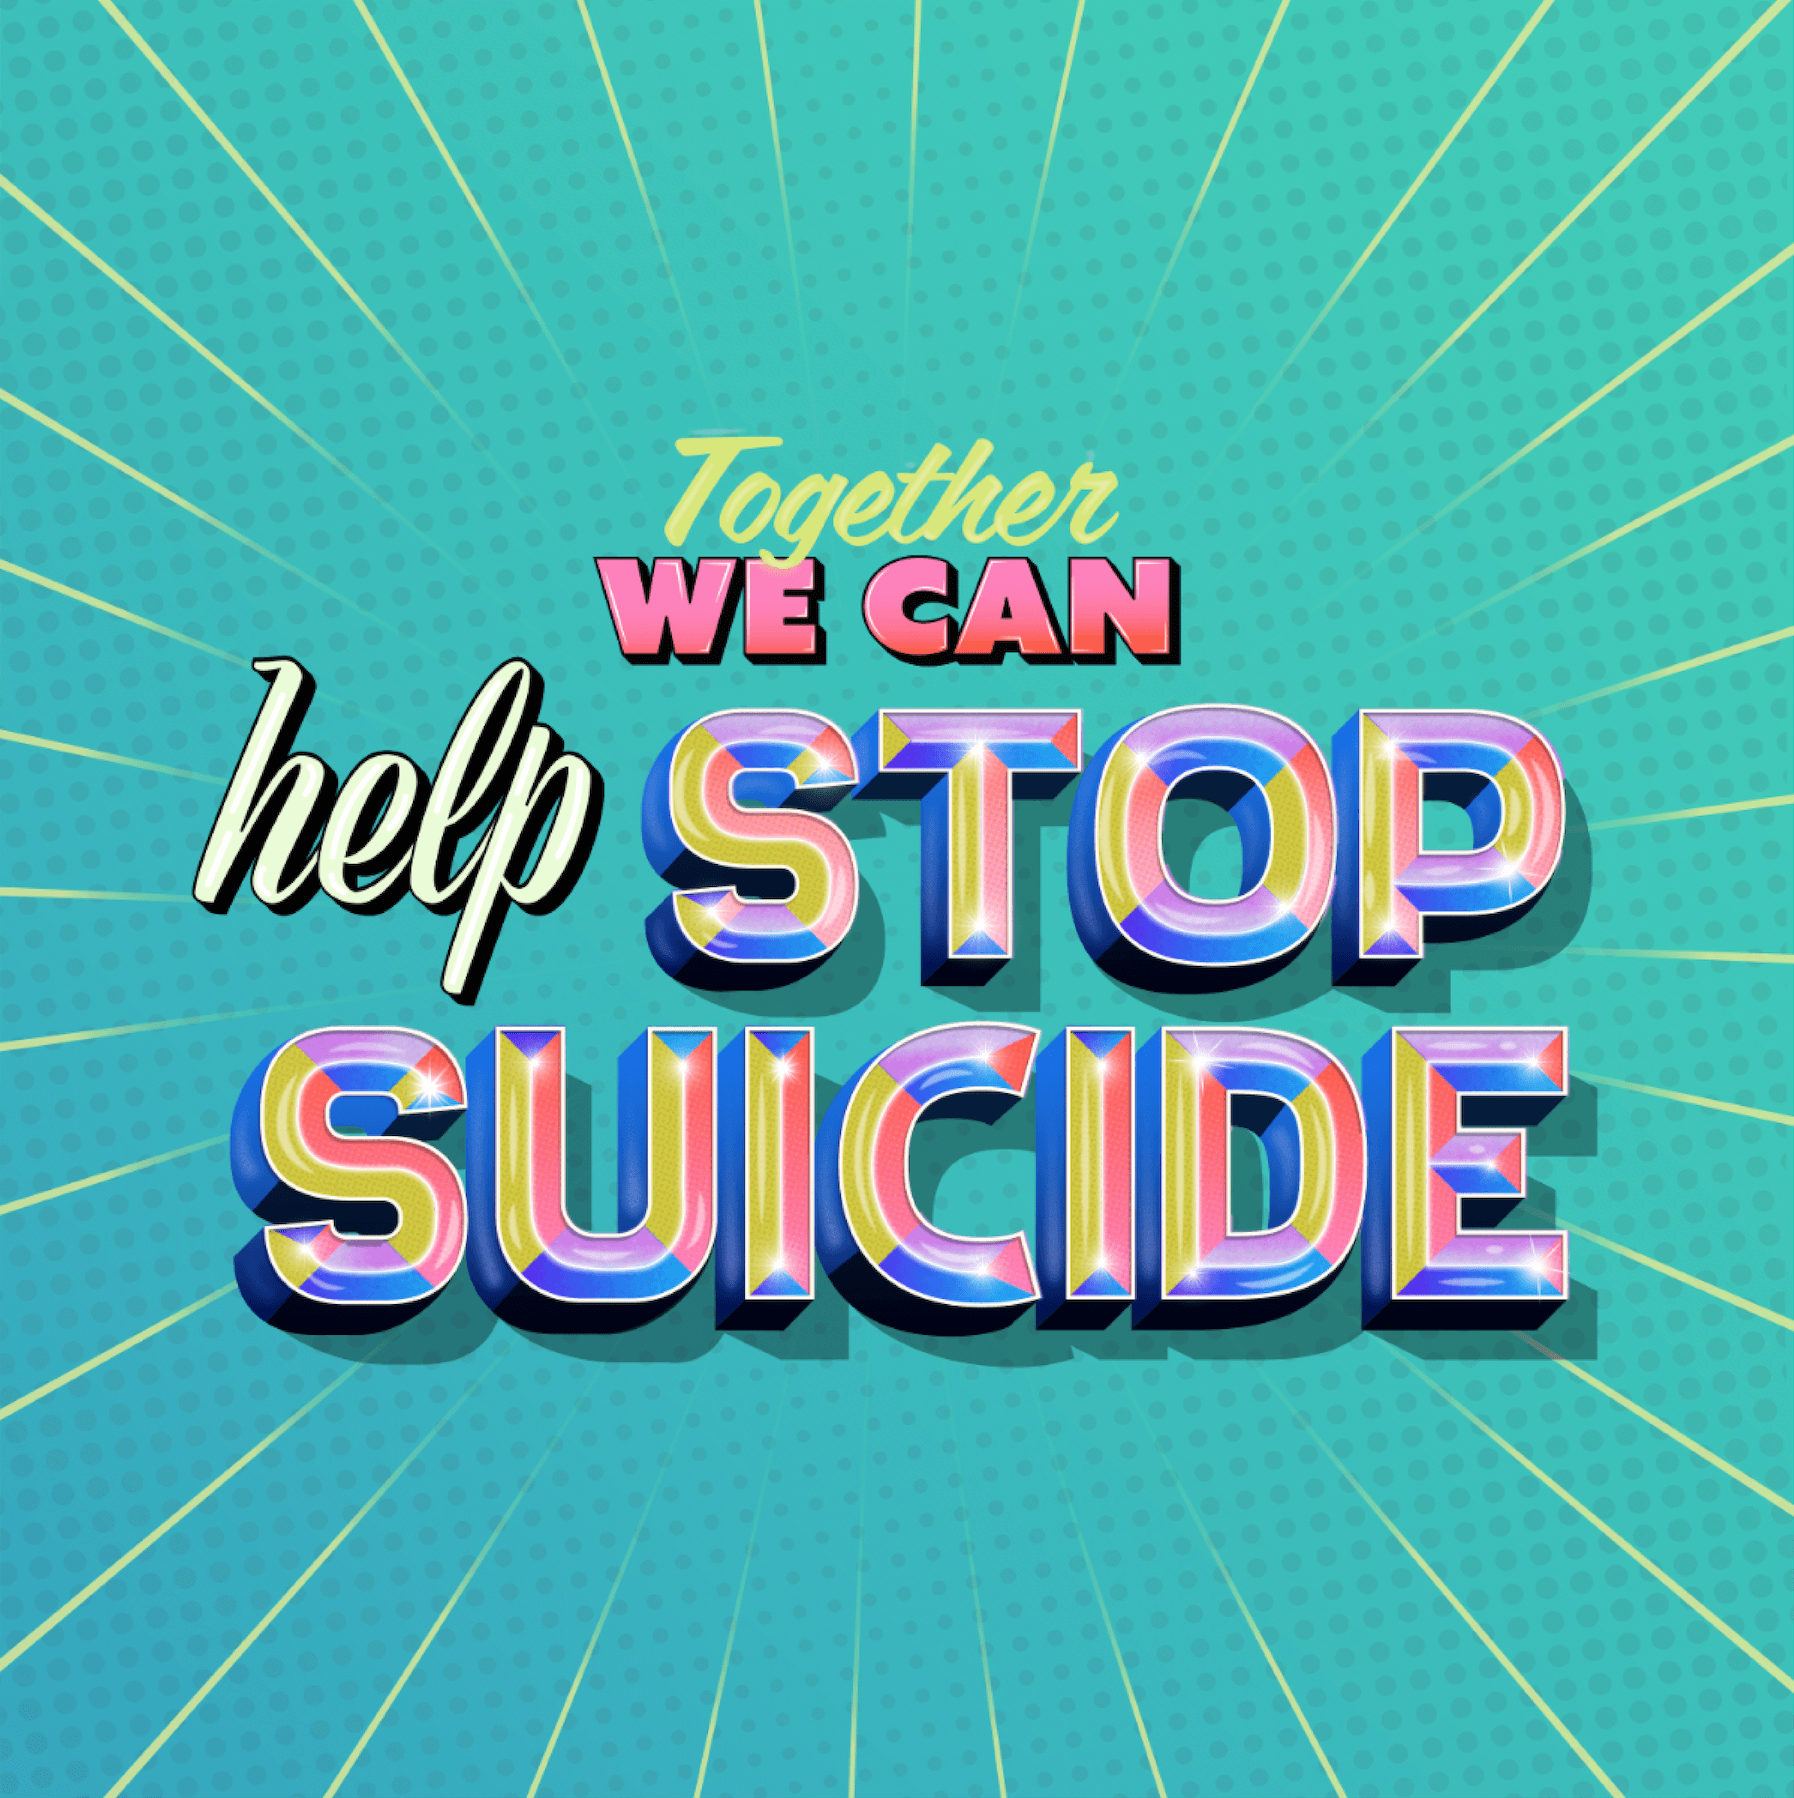 We Can Help Stop Suicide - Jess Goldsmith